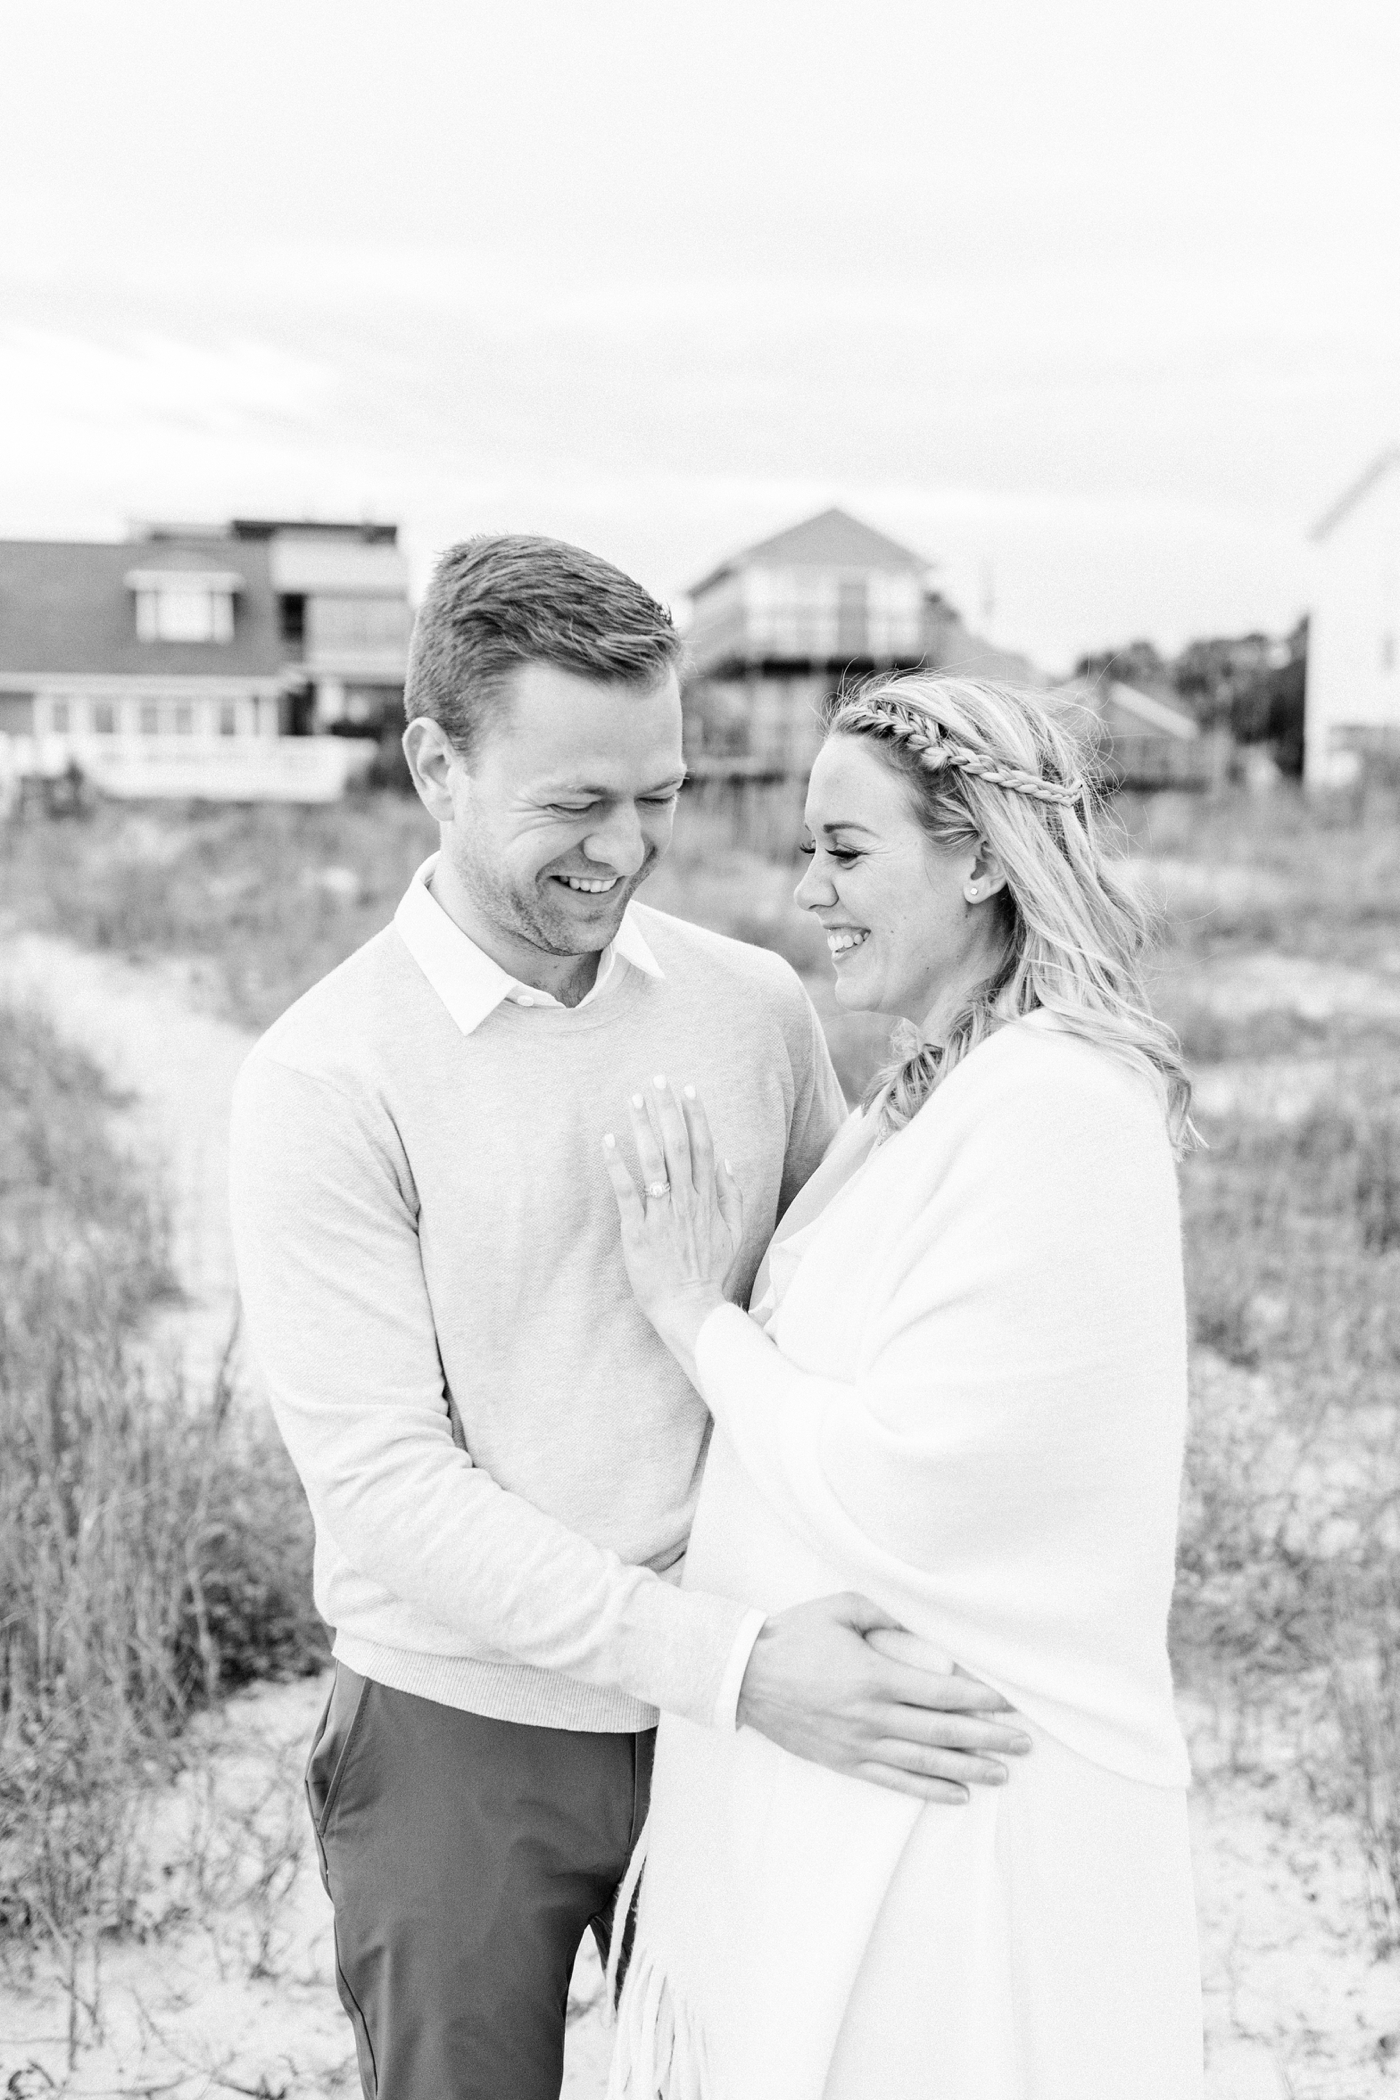 Mom and Dad-to-be laughing during maternity photoshoot in Charleston Caitlyn Motycka Photography.